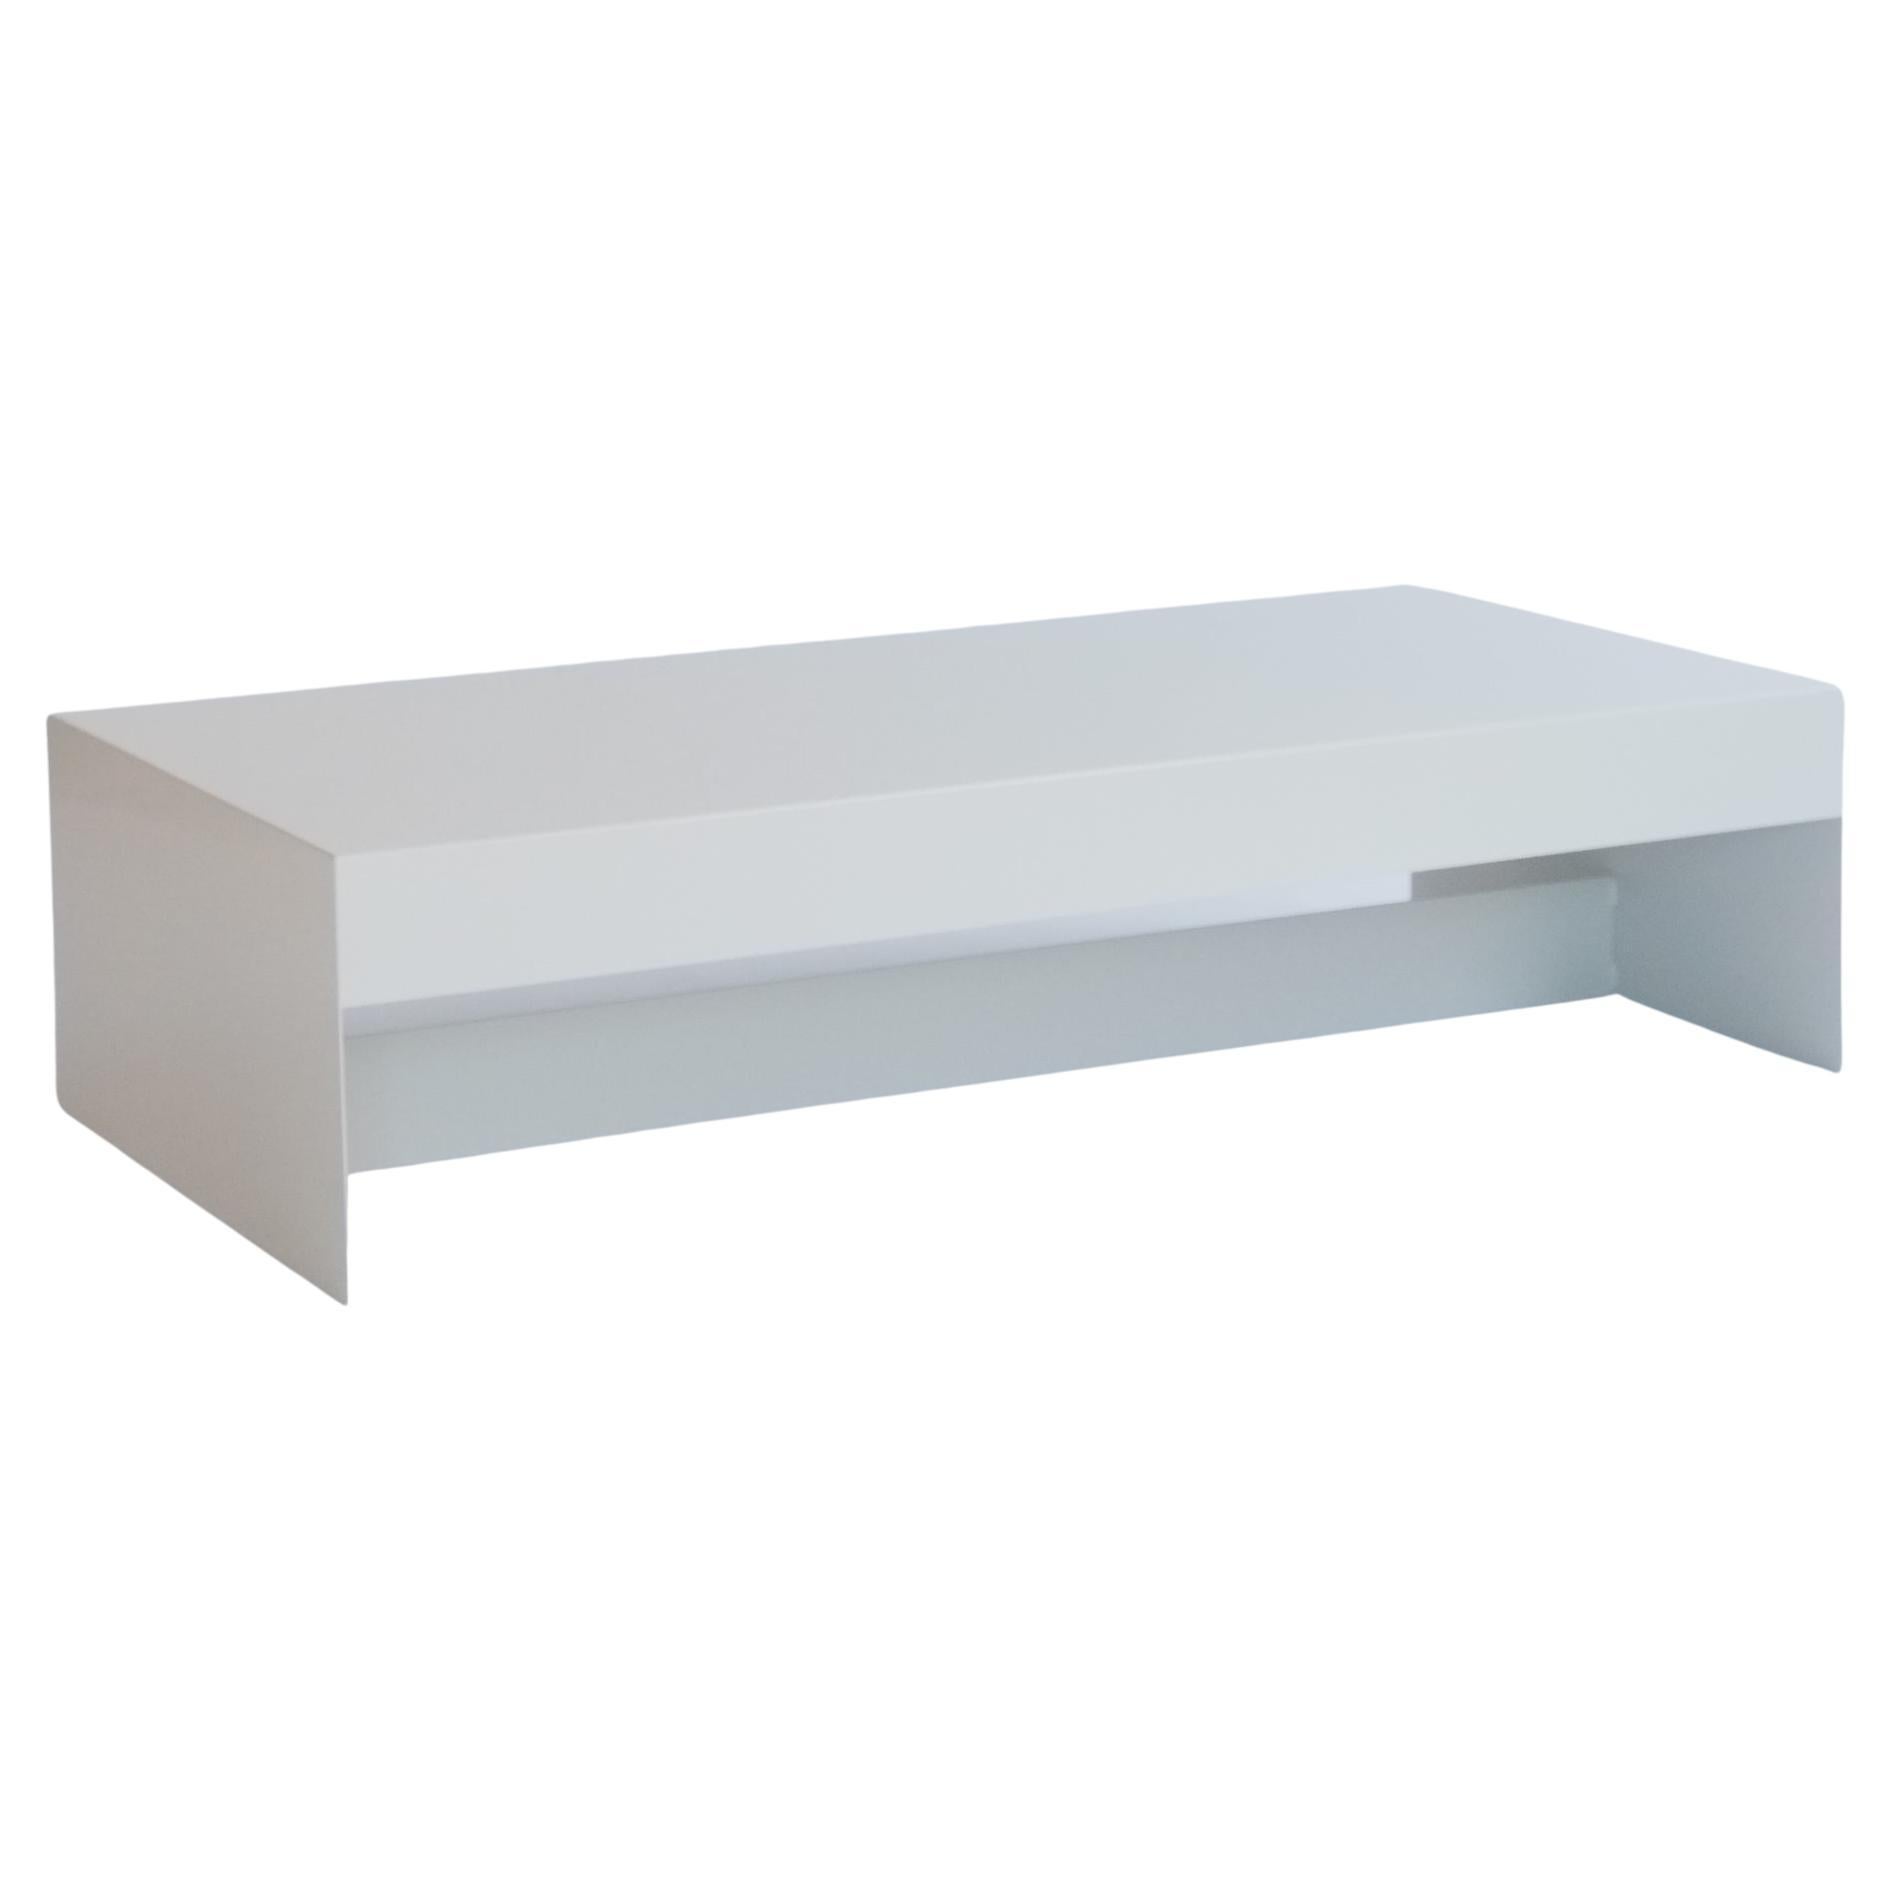 Paper White, Single Form Bespoke Aluminium Coffee Table, Customisable For Sale